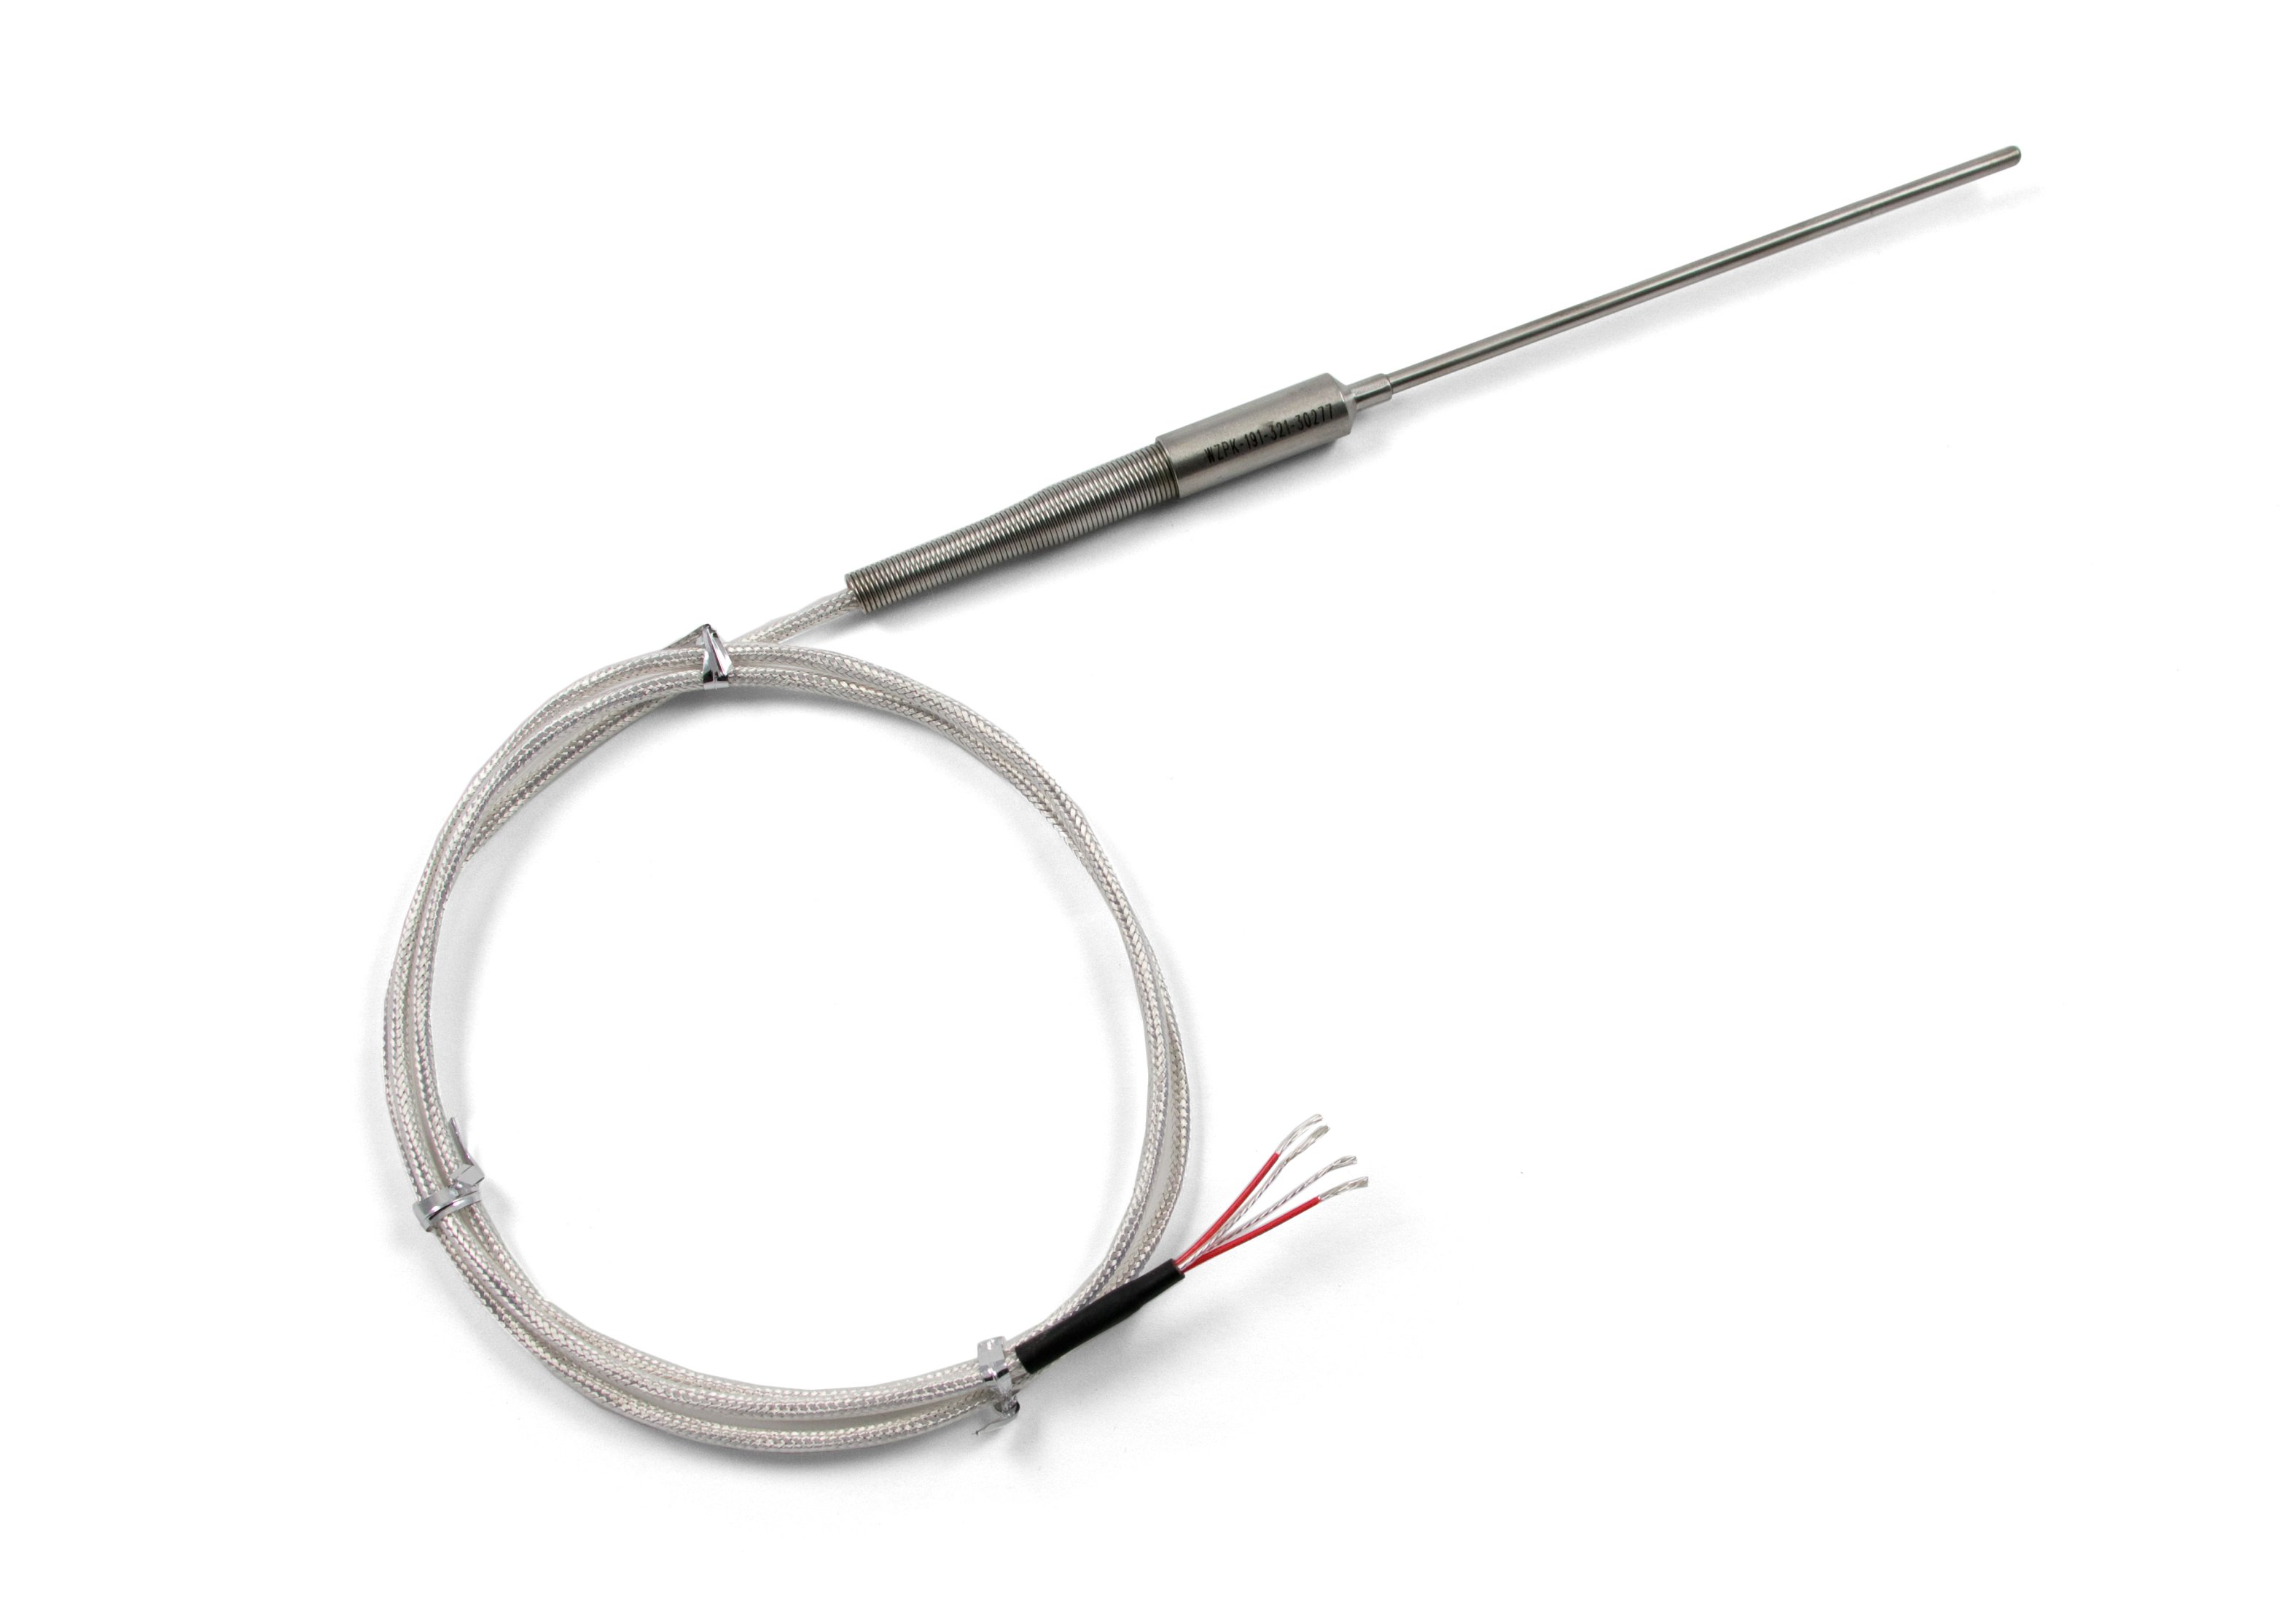 Air Temperature Sensor with sheathed RTD probe for Indoor and